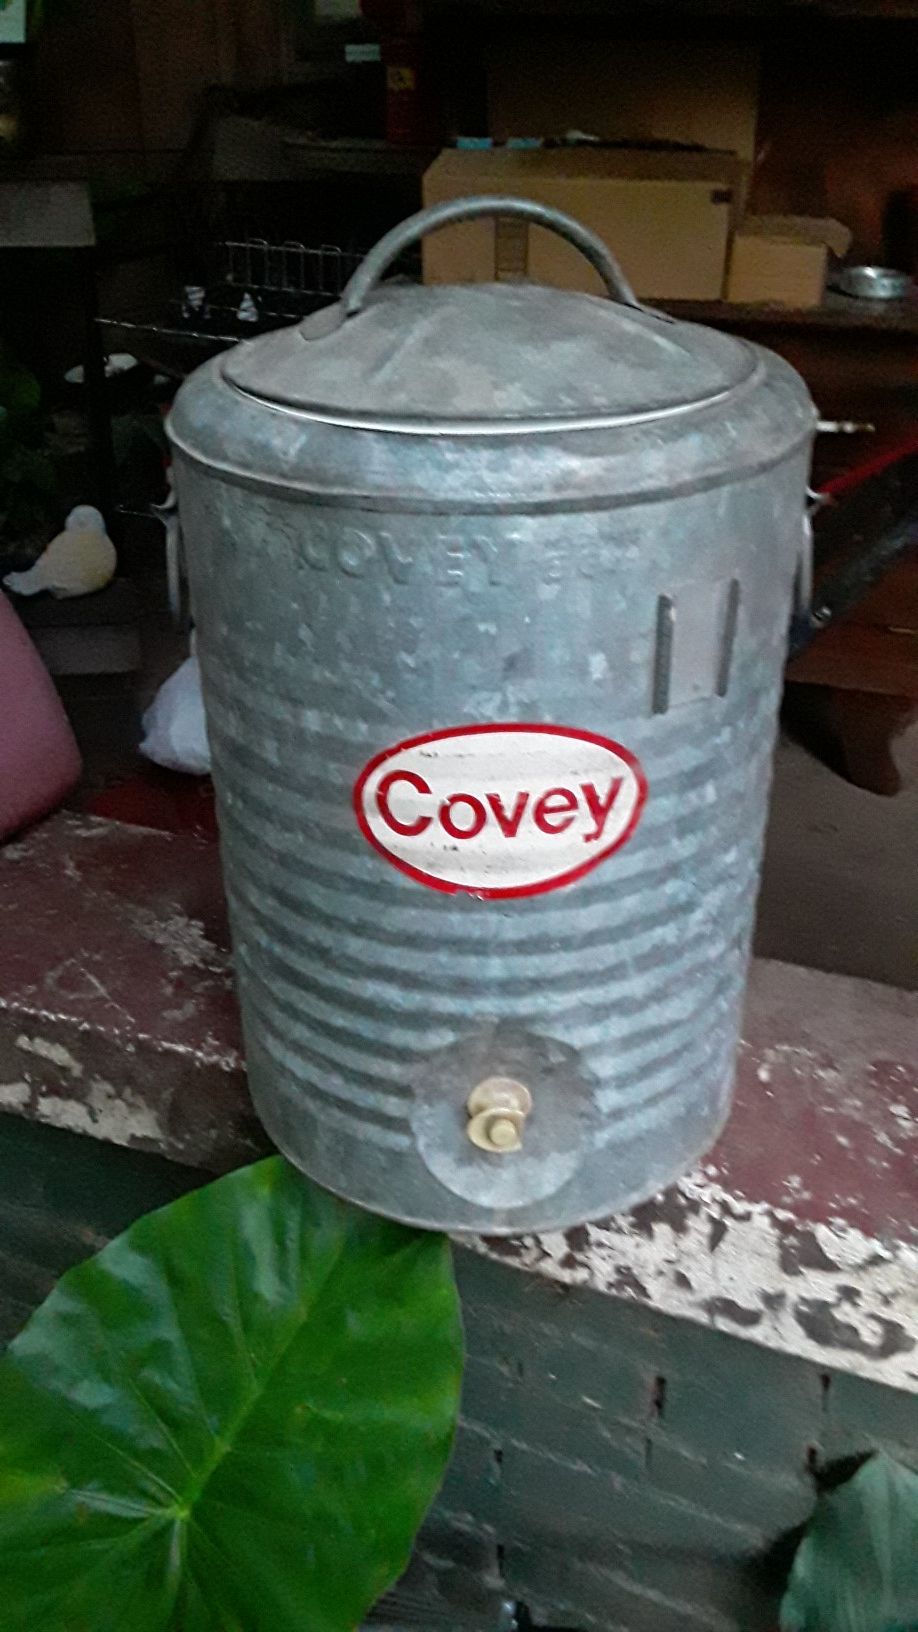 Covey water can